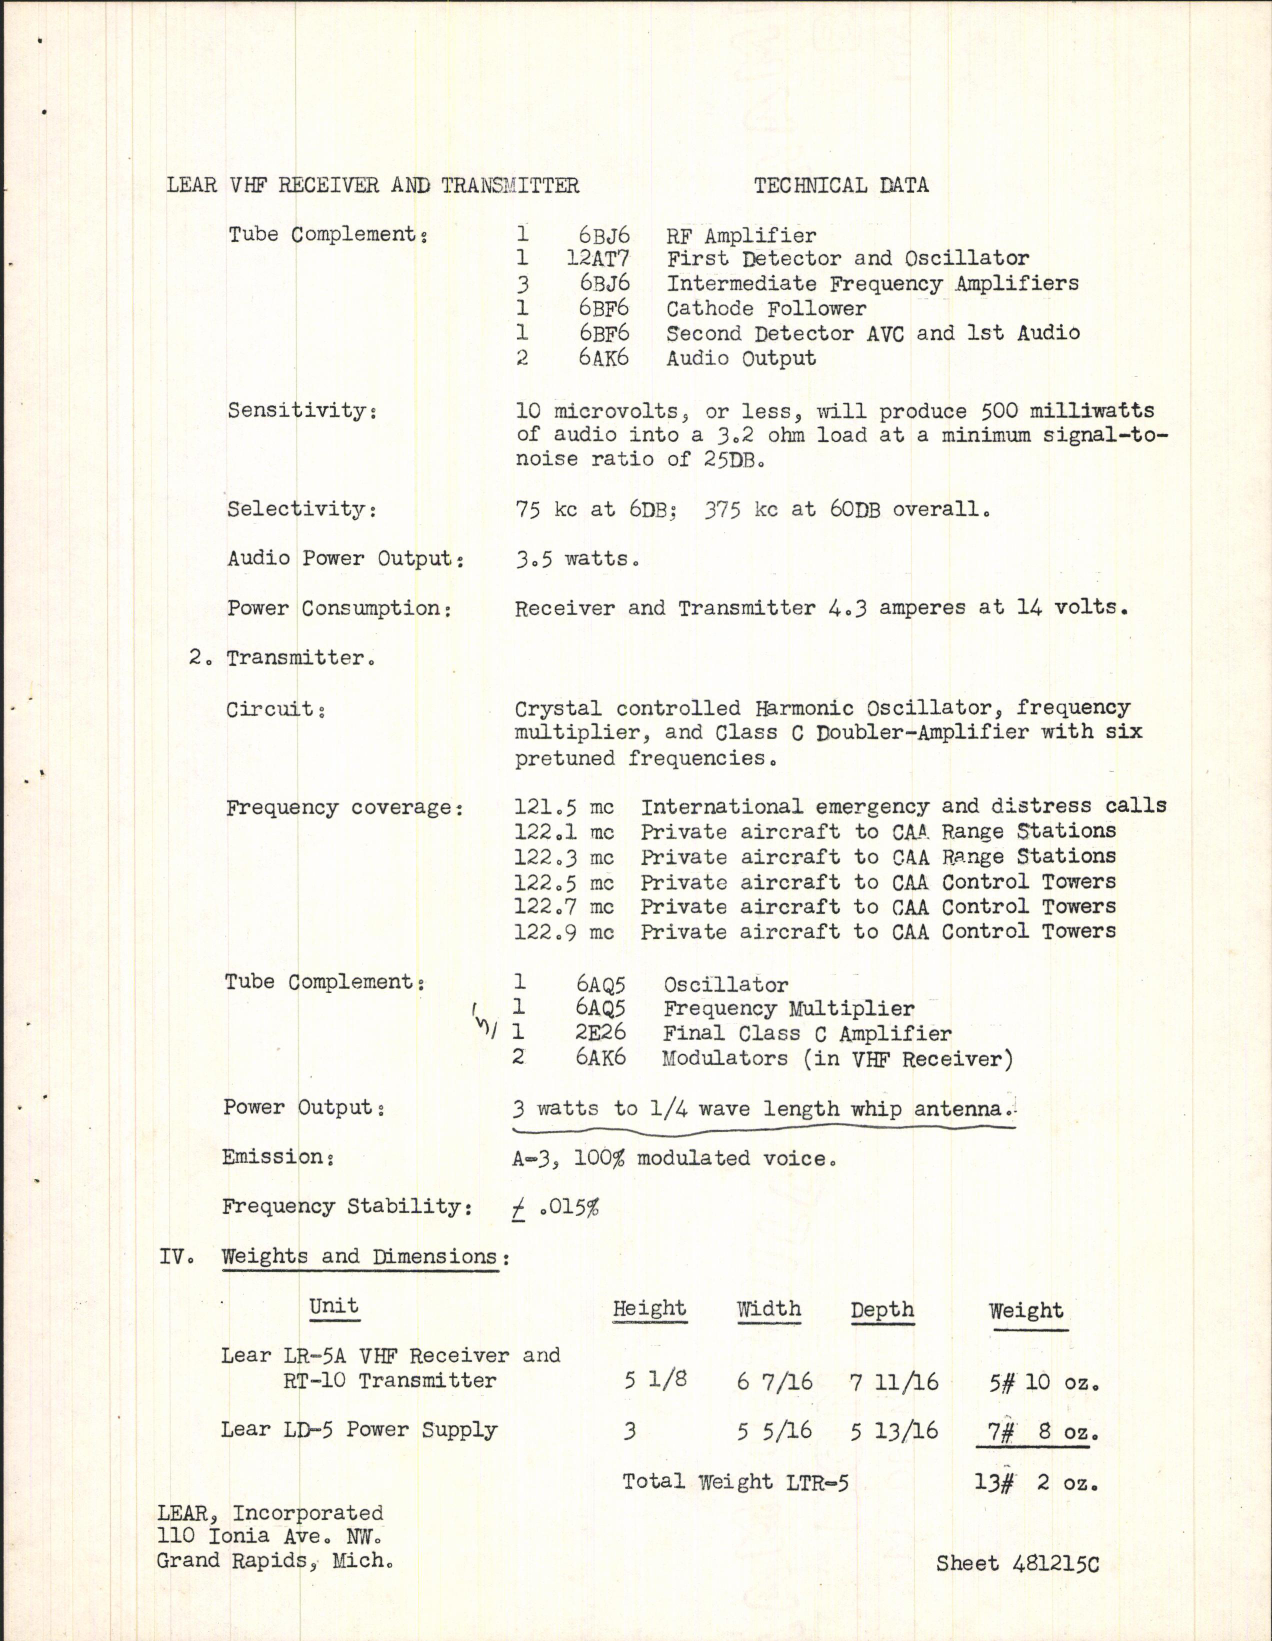 Sample page 3 from AirCorps Library document: Technical Data for Lear VHF Transmitter and Receiver Model LTR-5